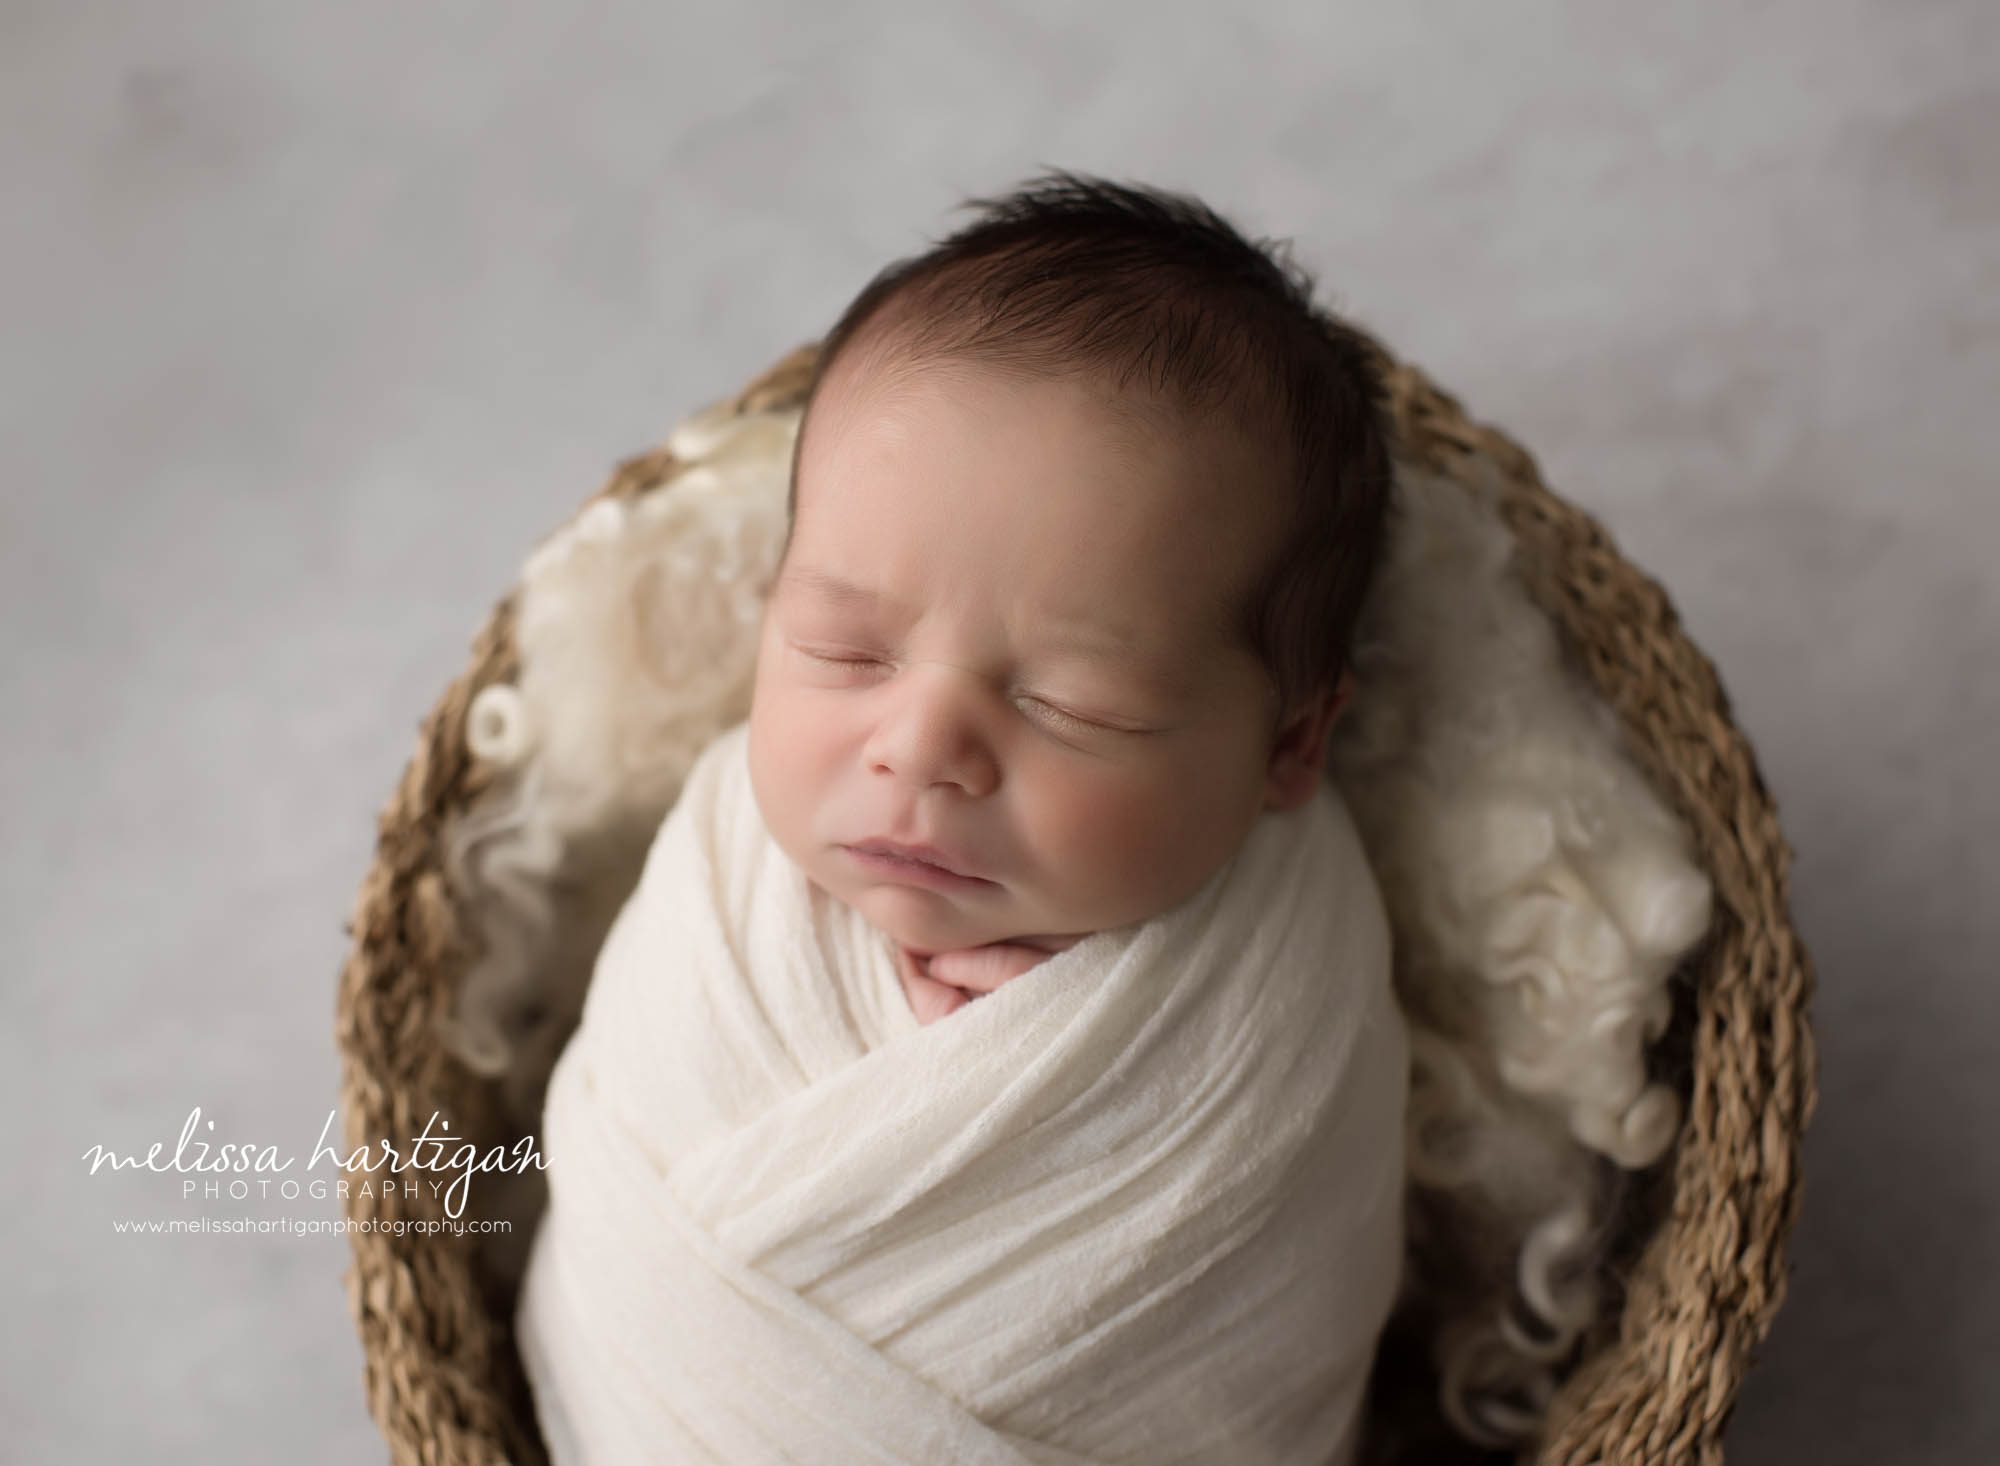 Baby boy wrapped in cream wrpa posed in wicker basket